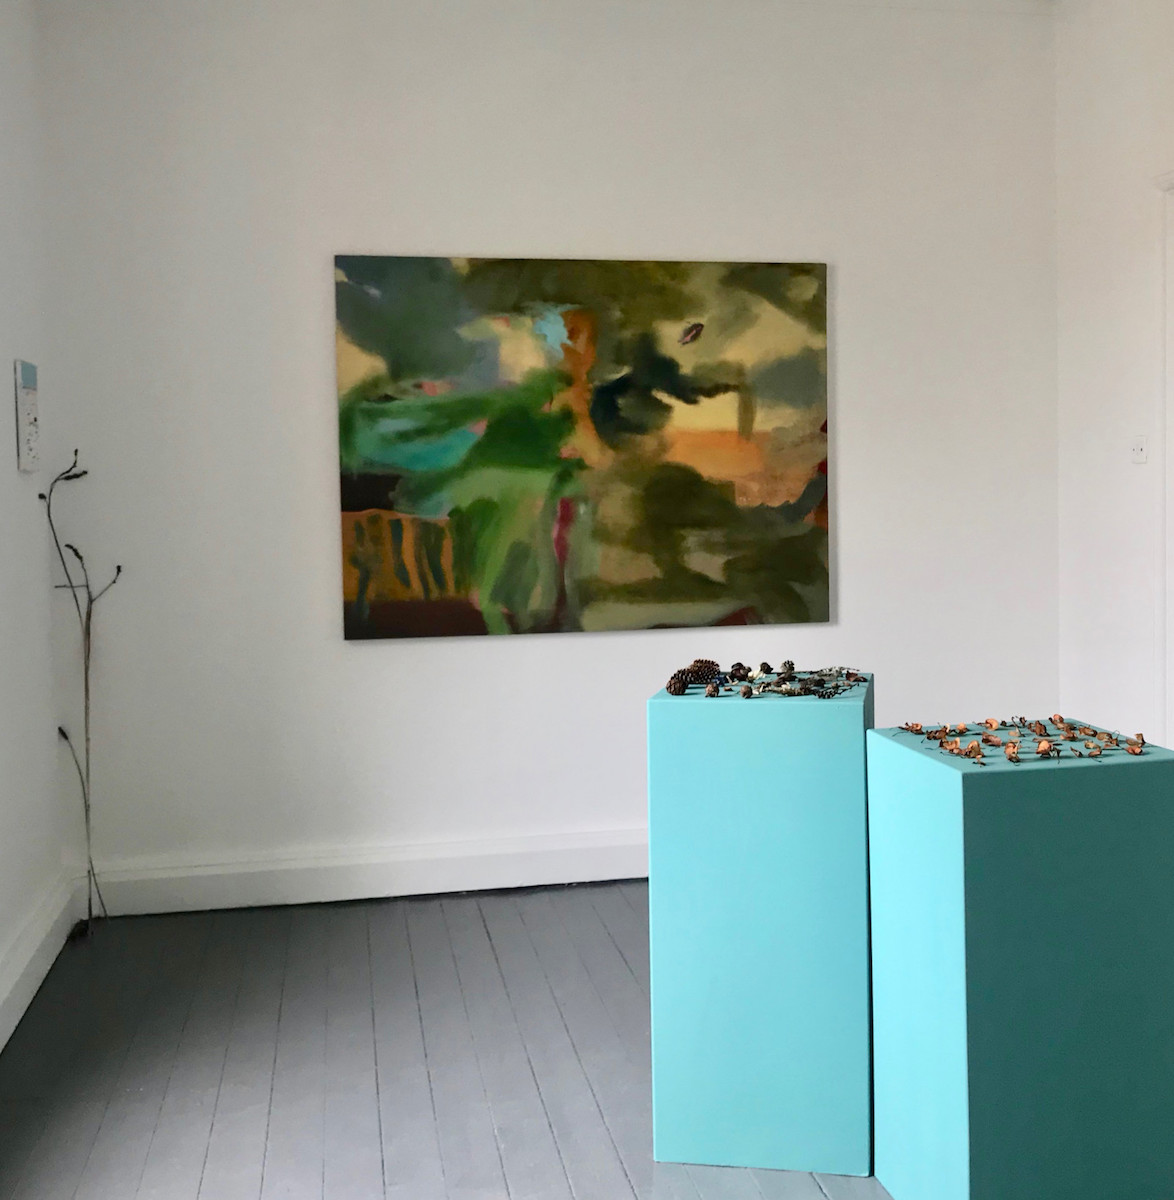 Barbara Lee, installation view, image courtesy of the artist.